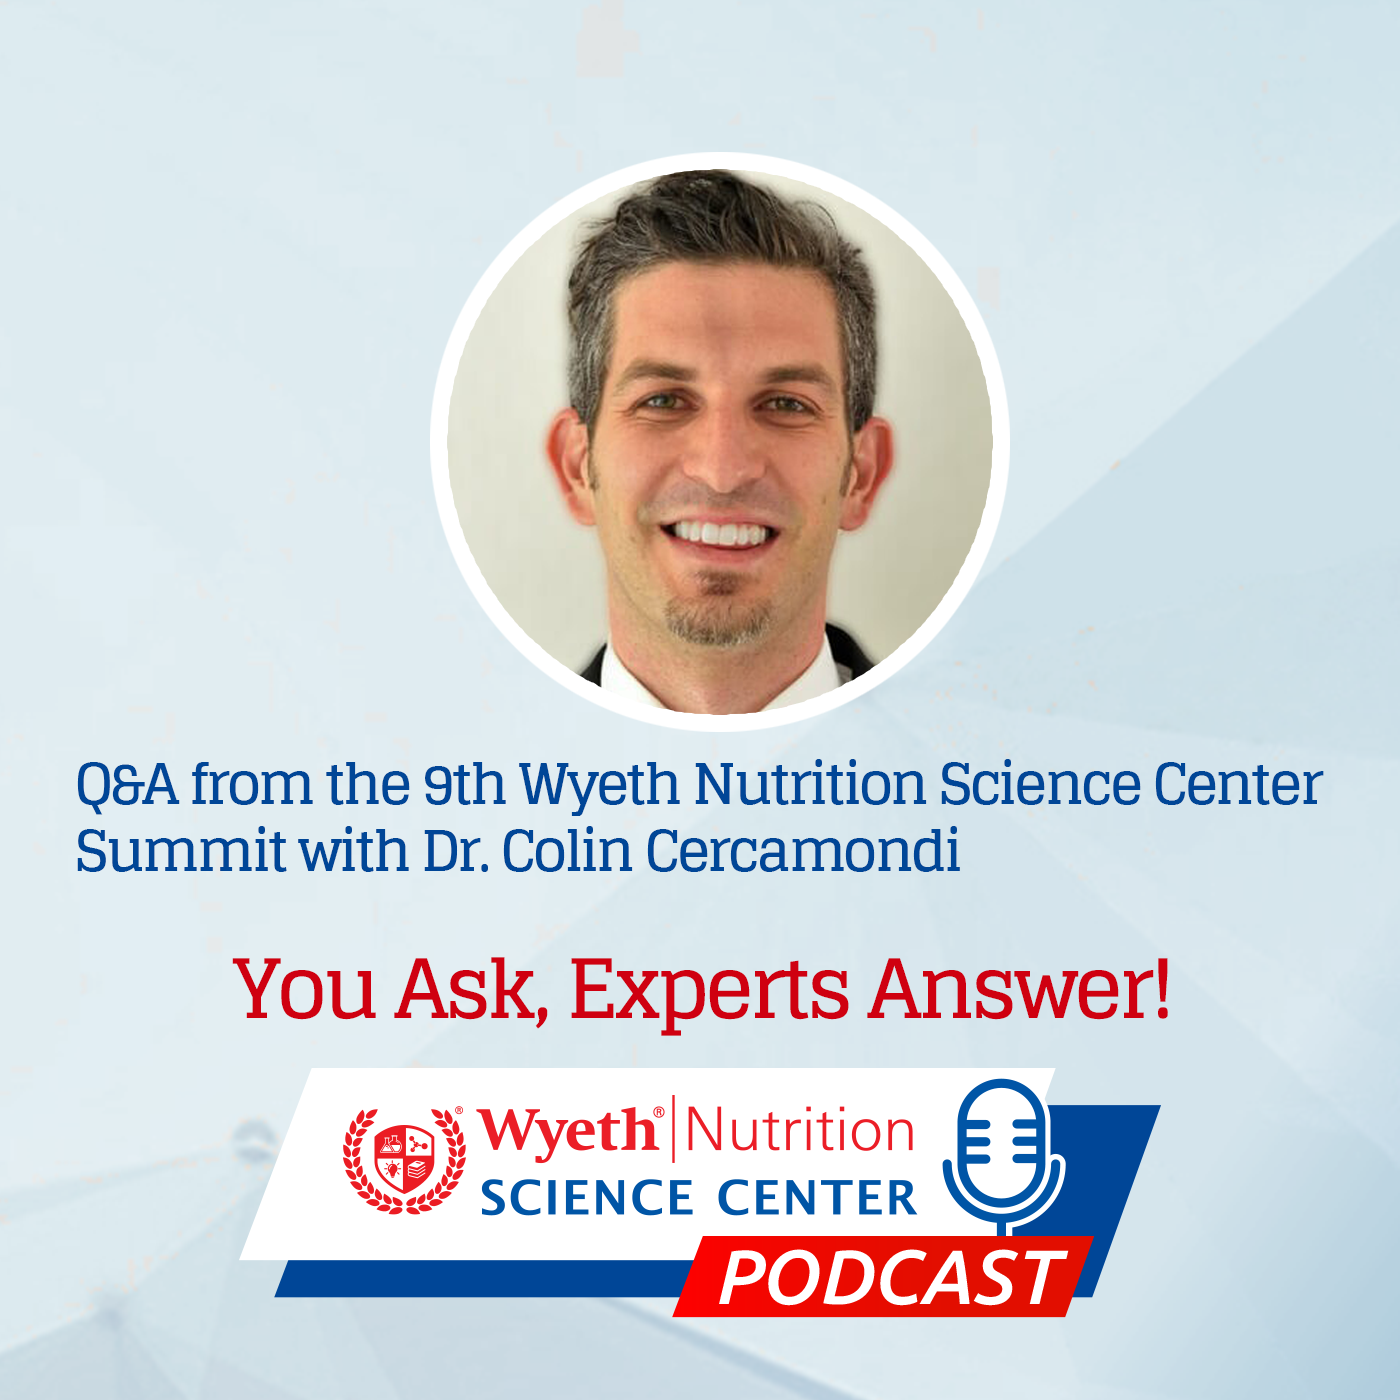 Q&A podcast from the 9th Wyeth Nutrition Science Center Summit with Dr. Colin Cercamondi